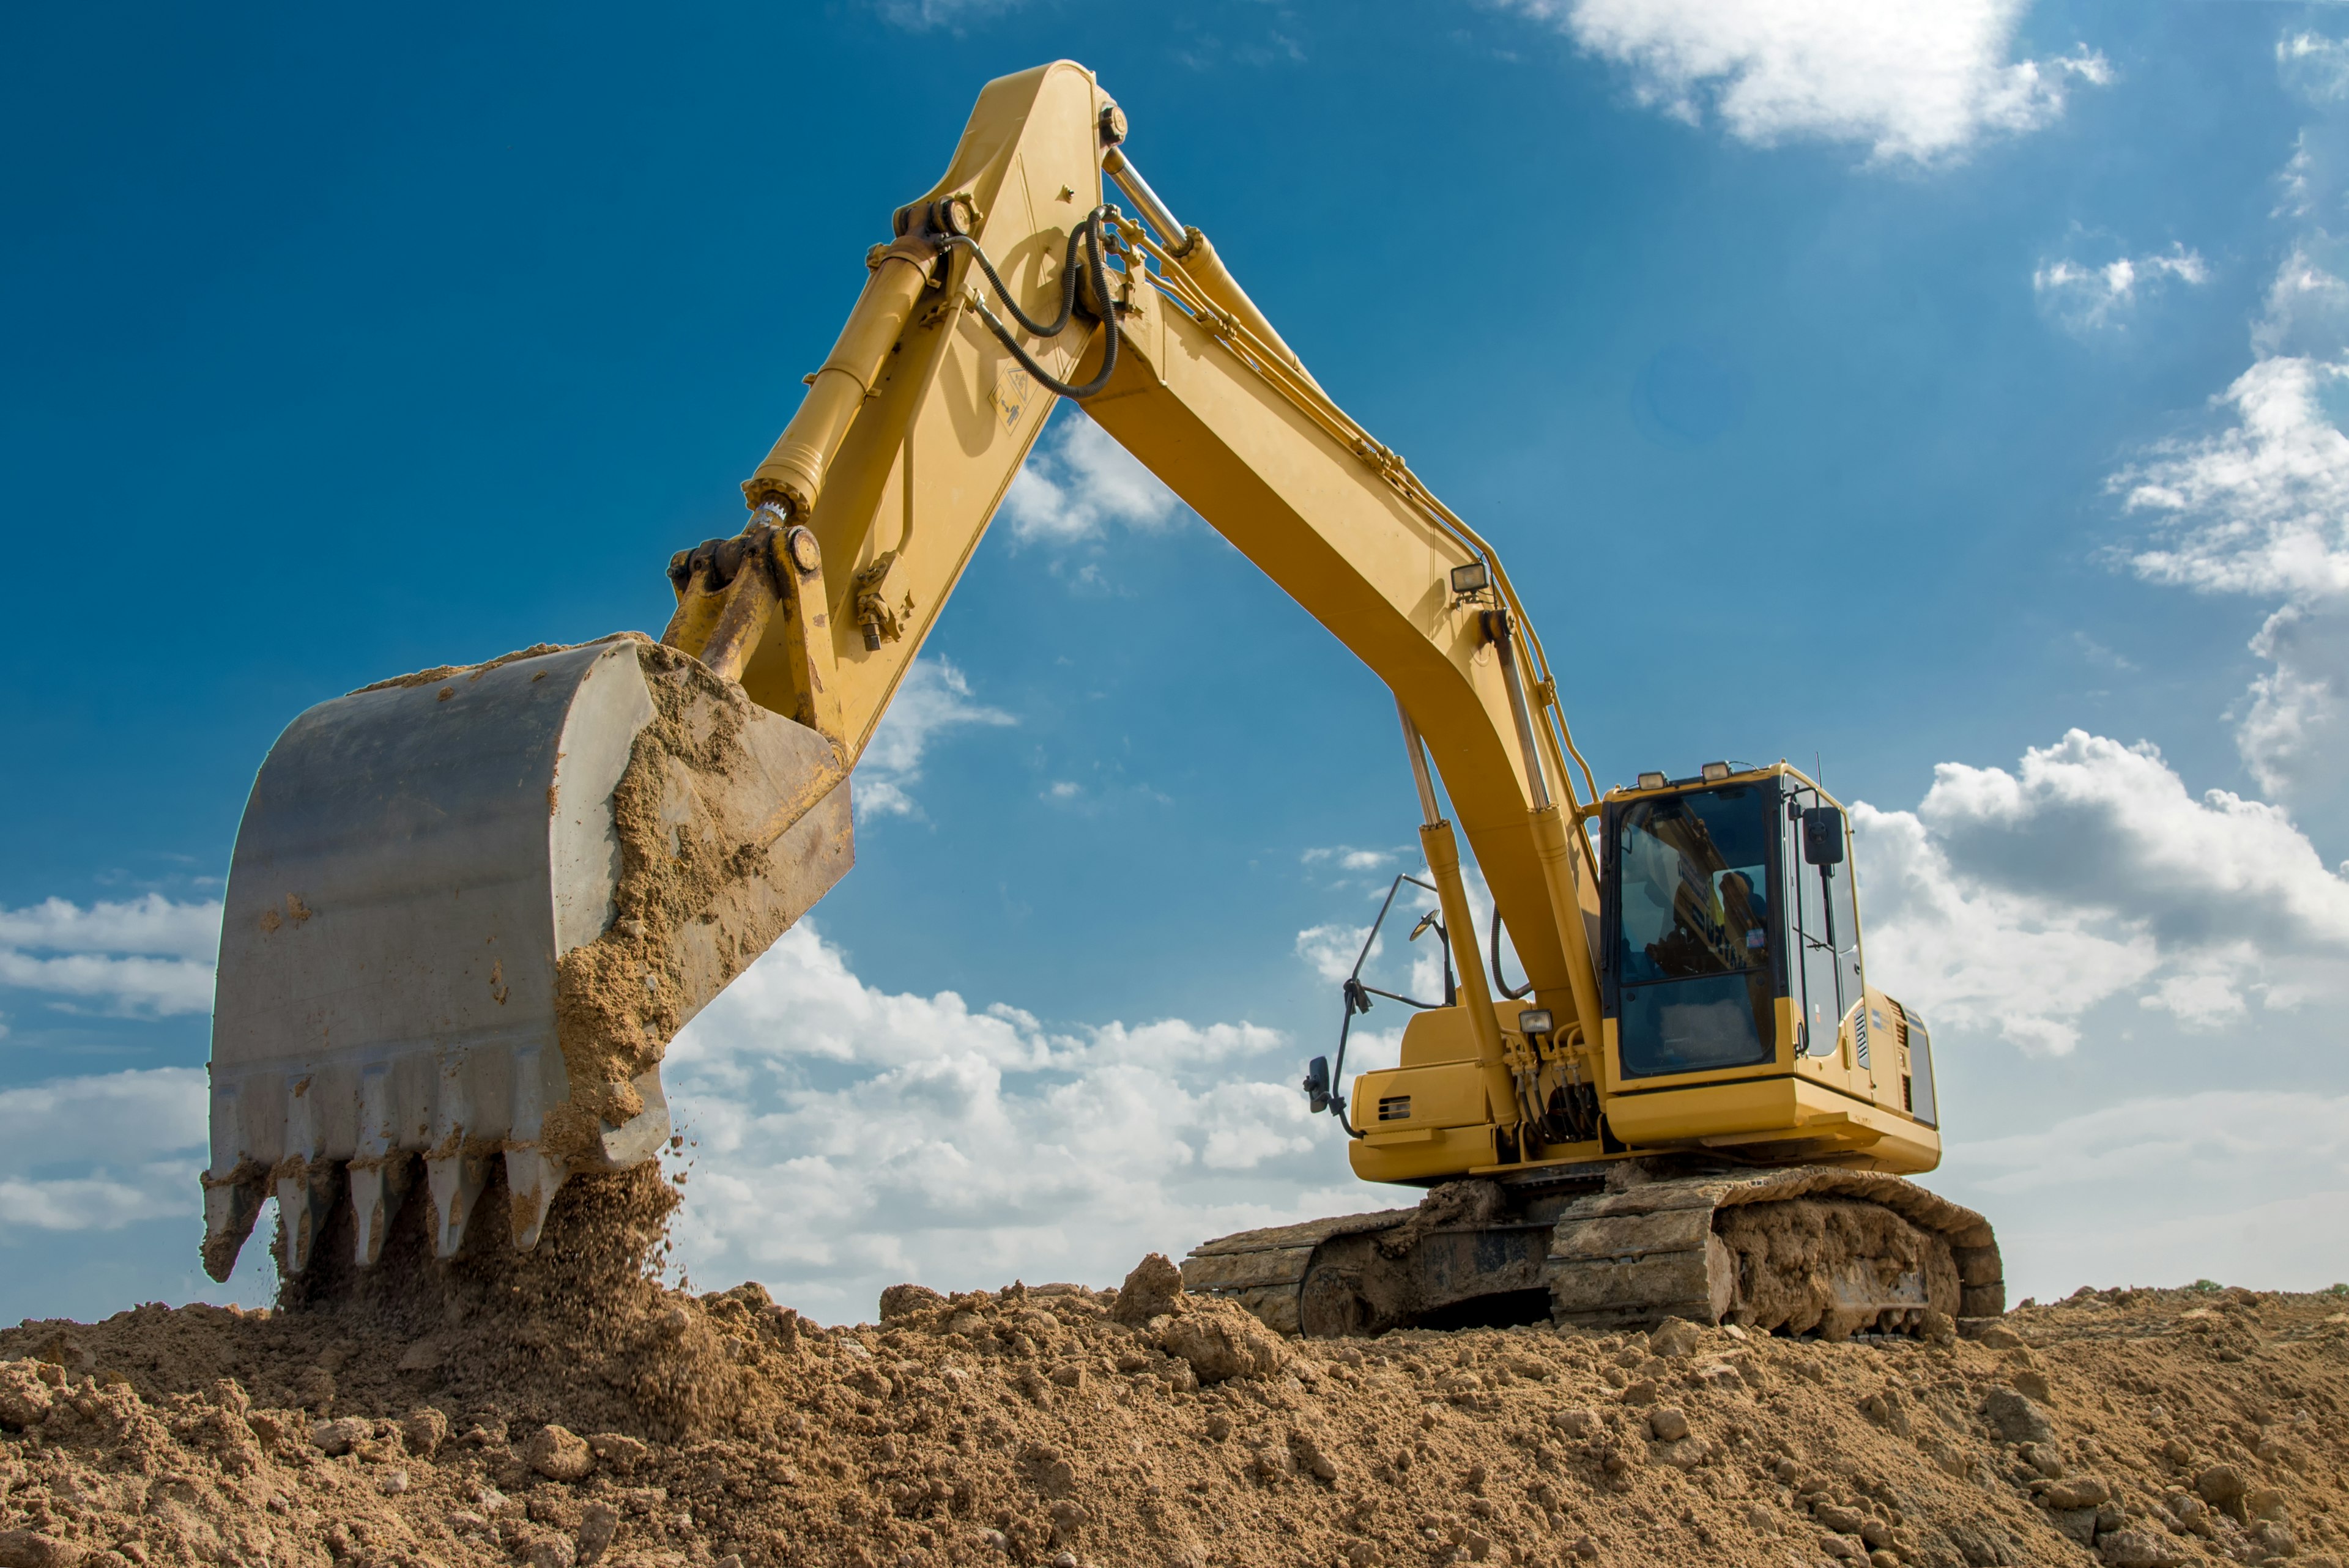 Excavator dropping soil on construction site